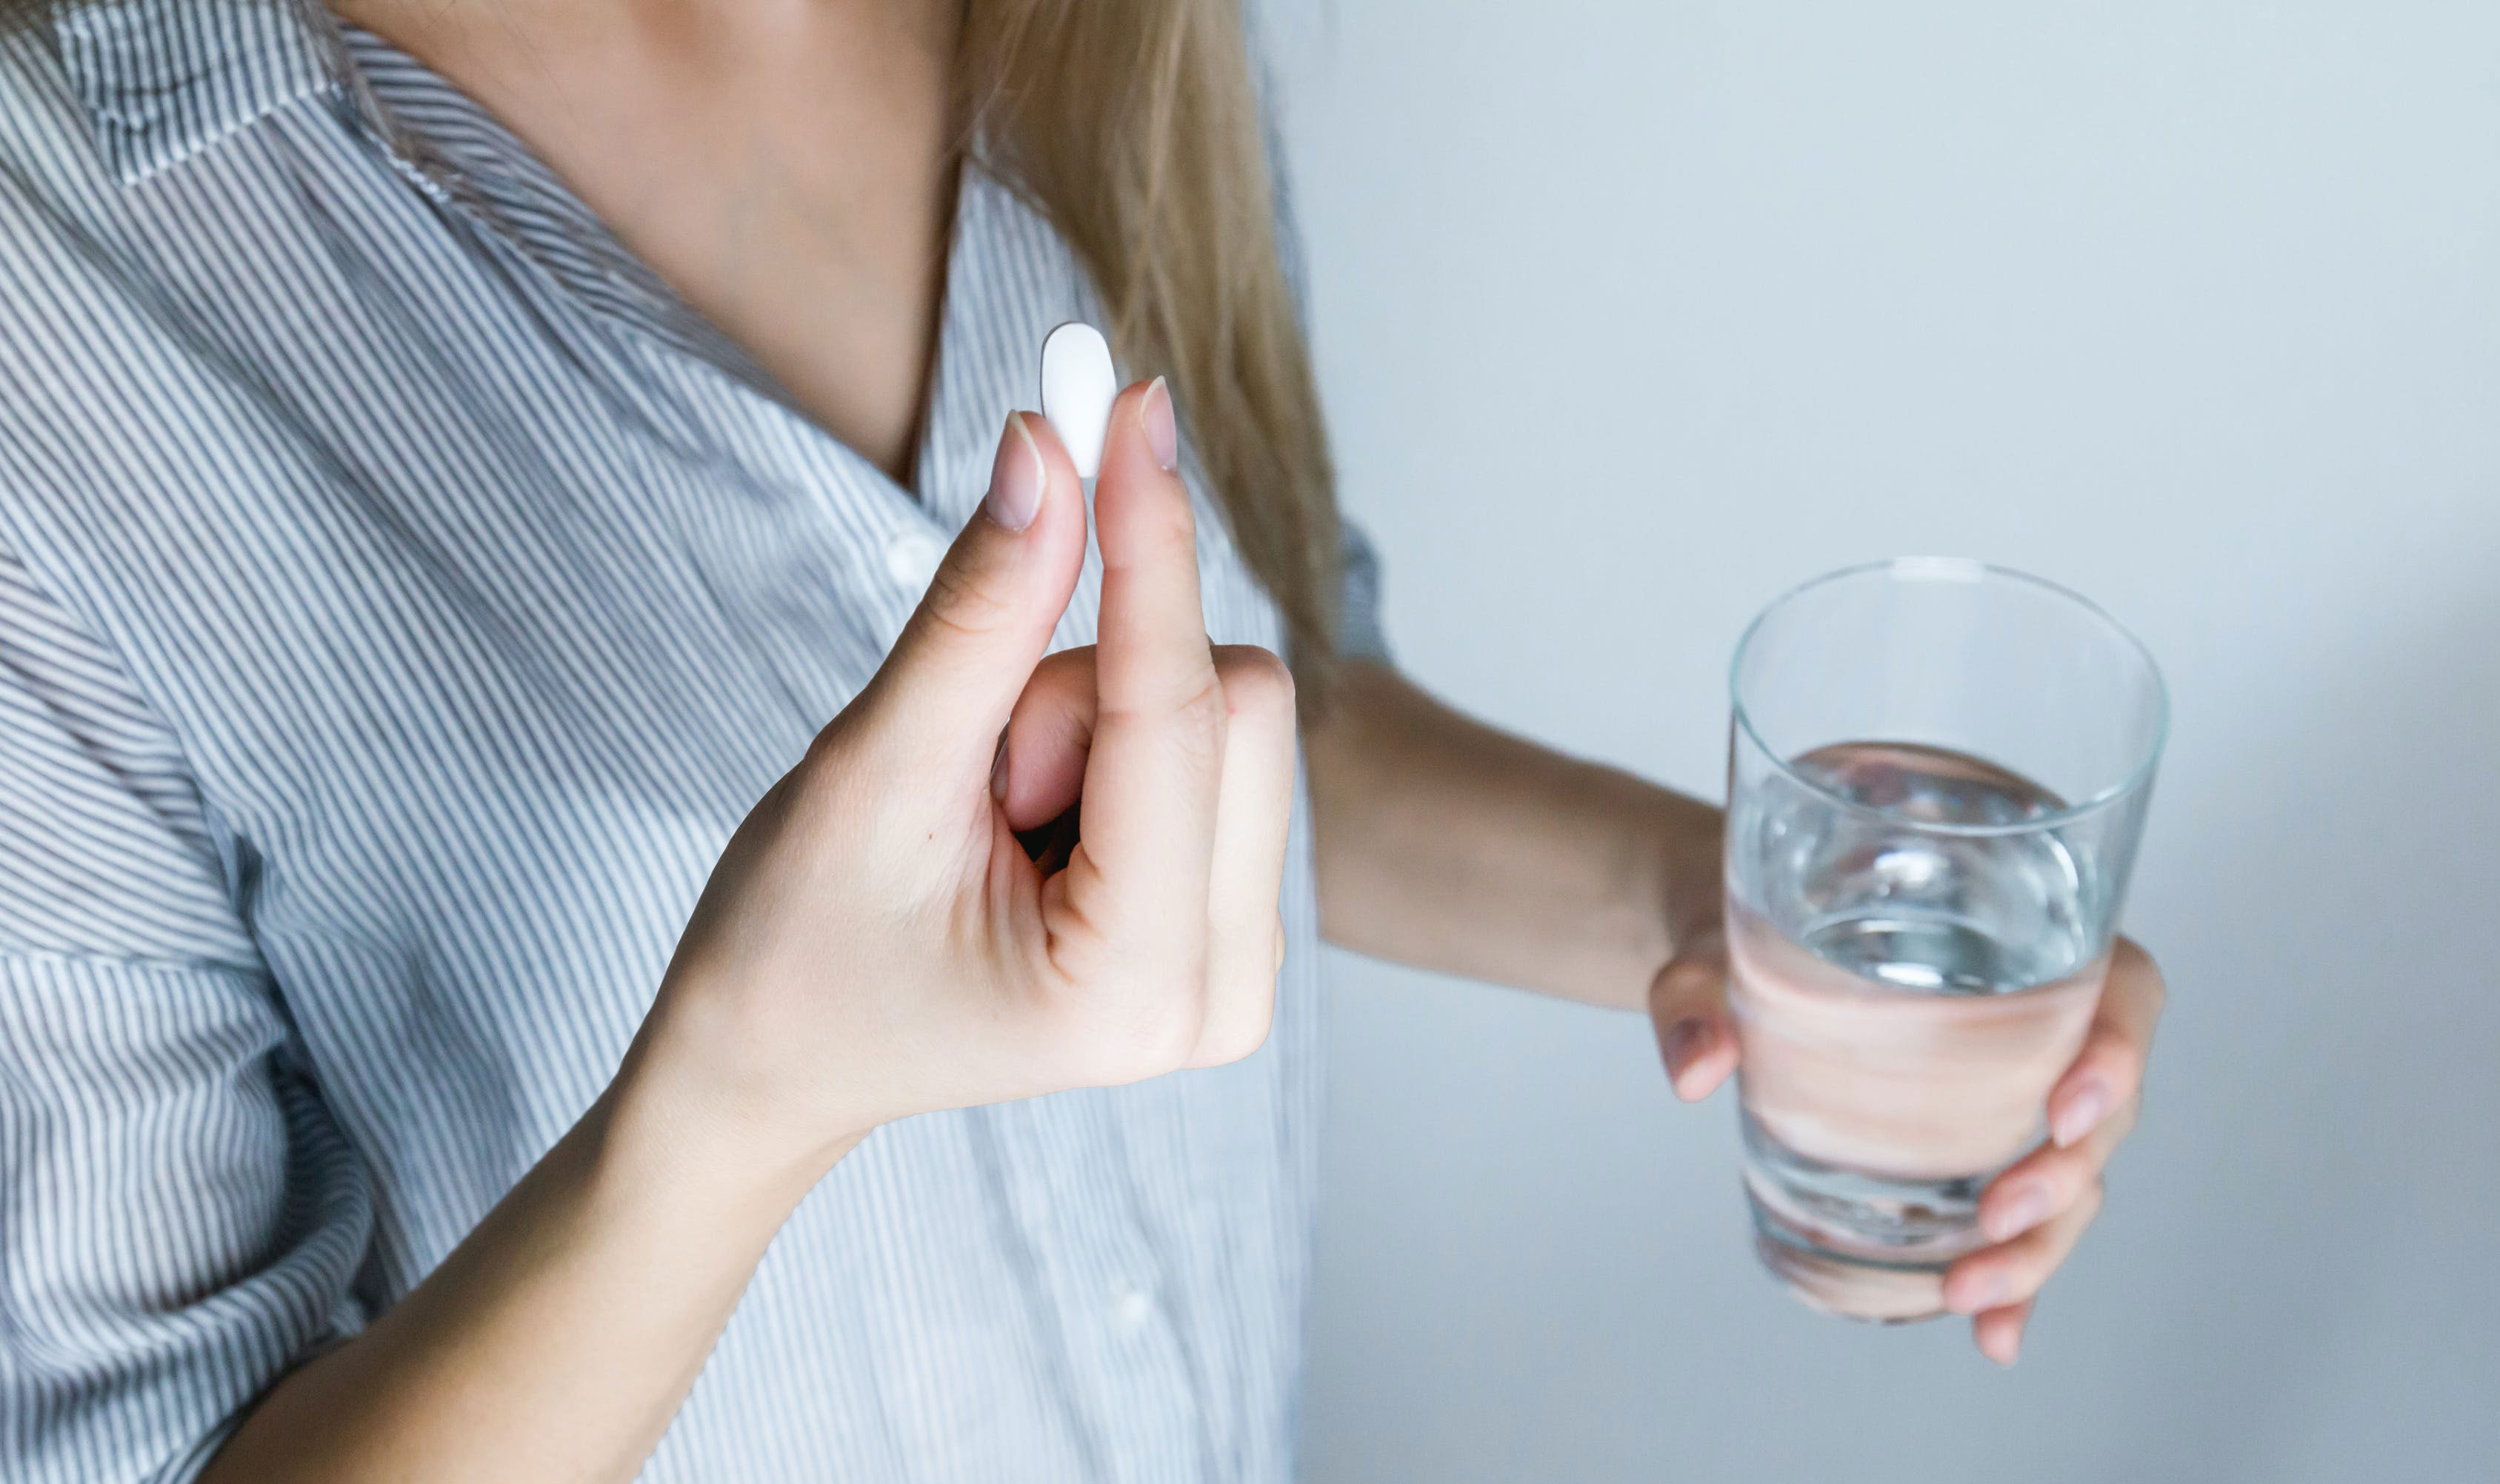 A person's hand holds a pill, illustrating treatment for constipation symptoms.